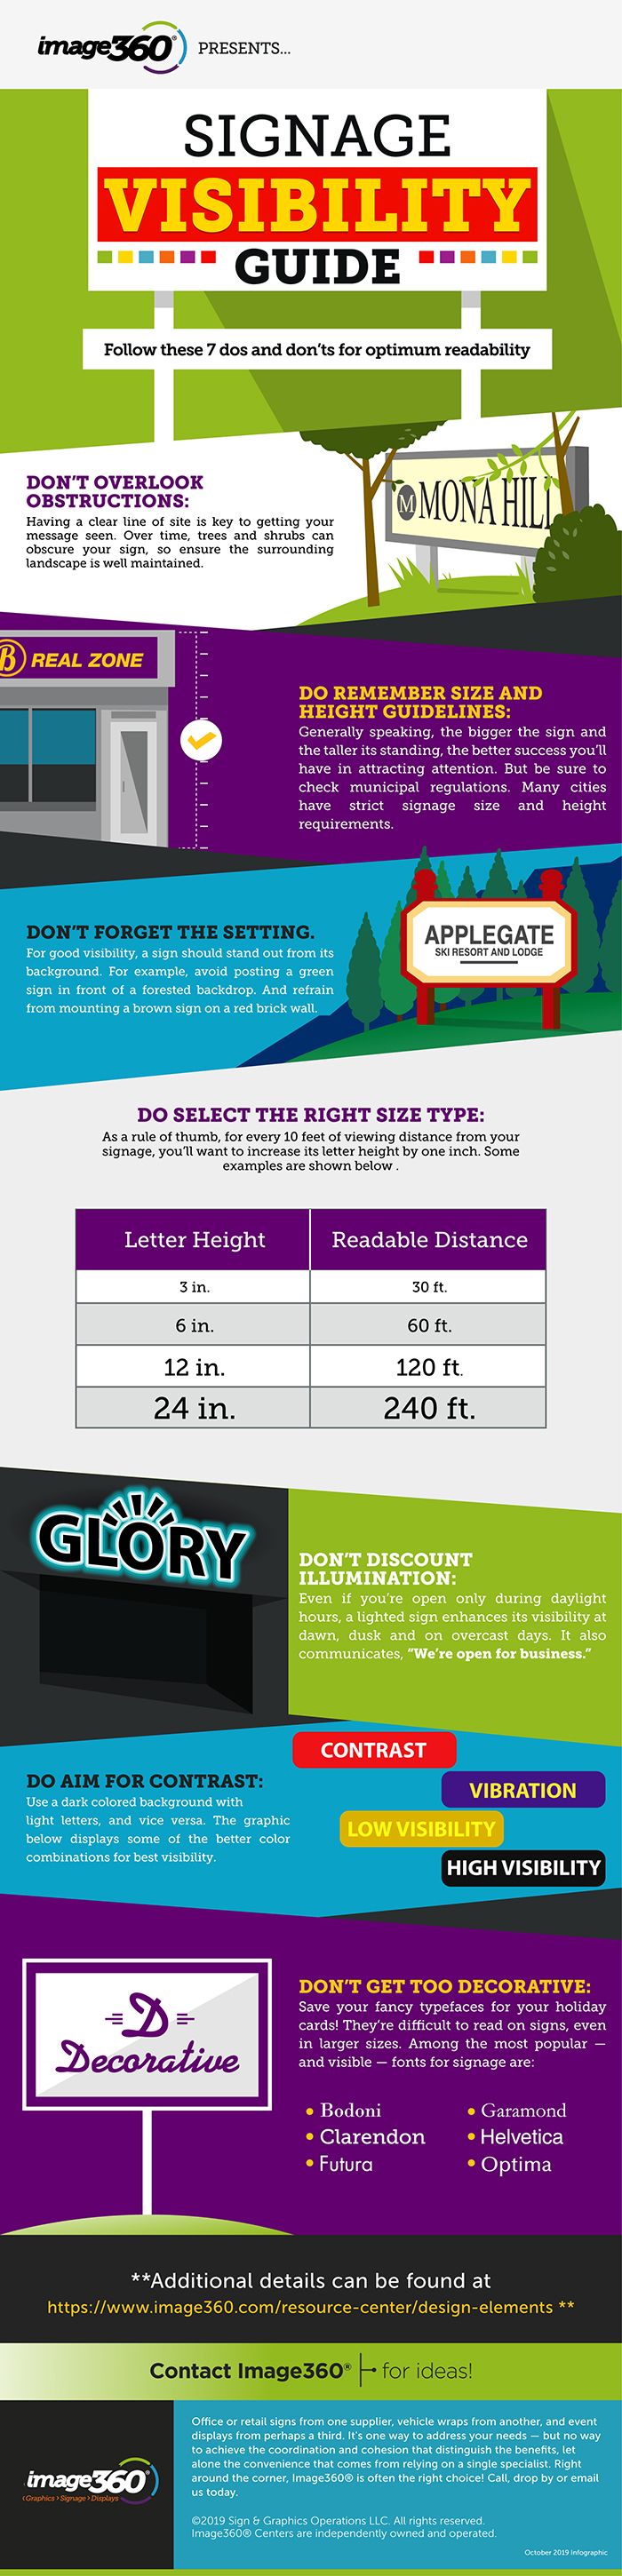 Image360 Infographic Signage Visibility Guide